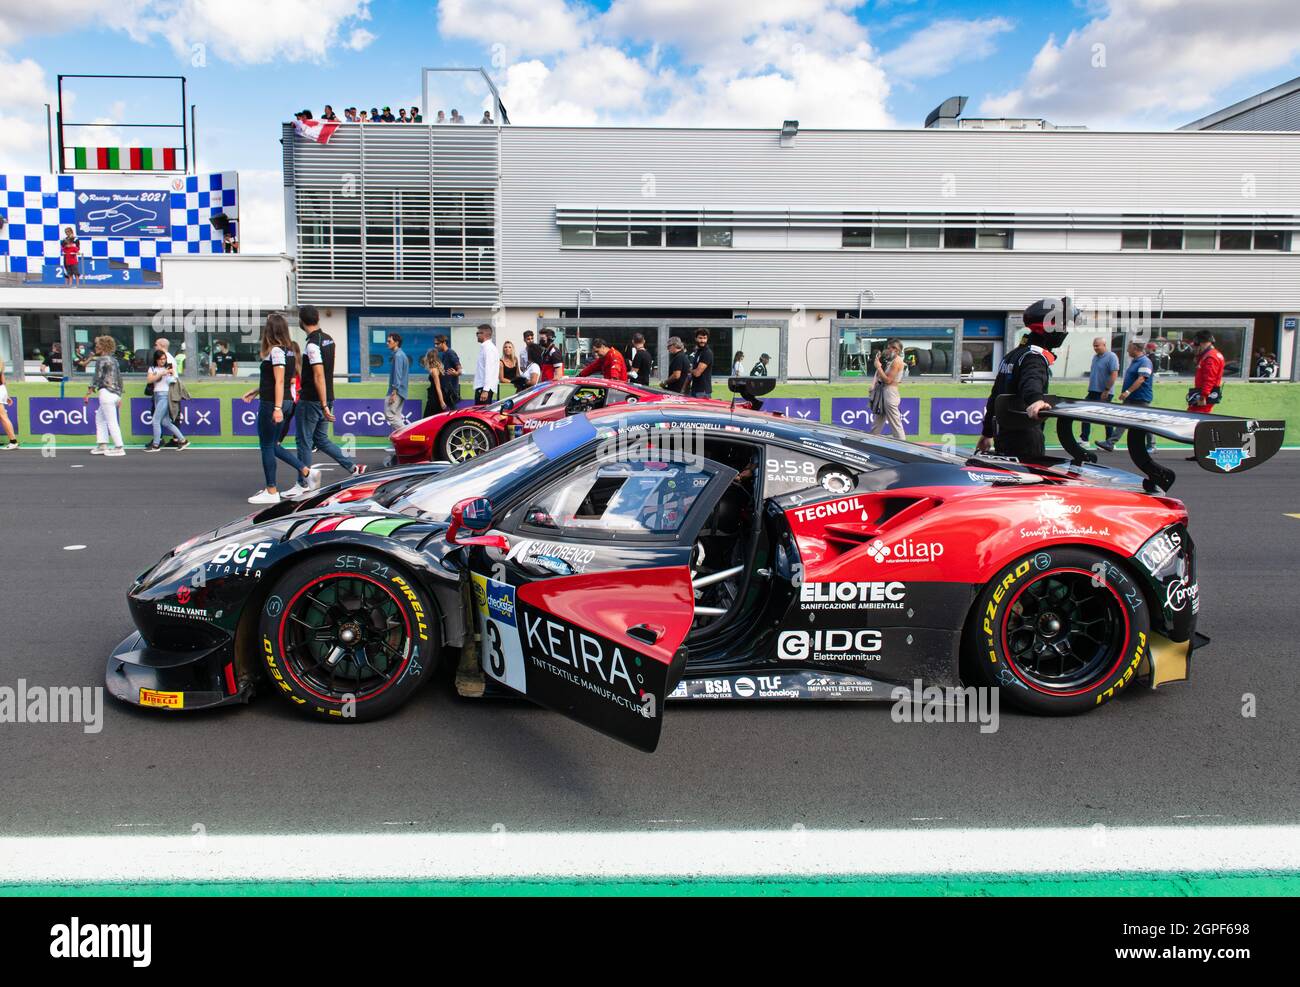 Vallelunga, italy september 19th 2021 Aci racing weekend. Car on race starting grid, Ferrari 488 GT endurance with team people Stock Photo